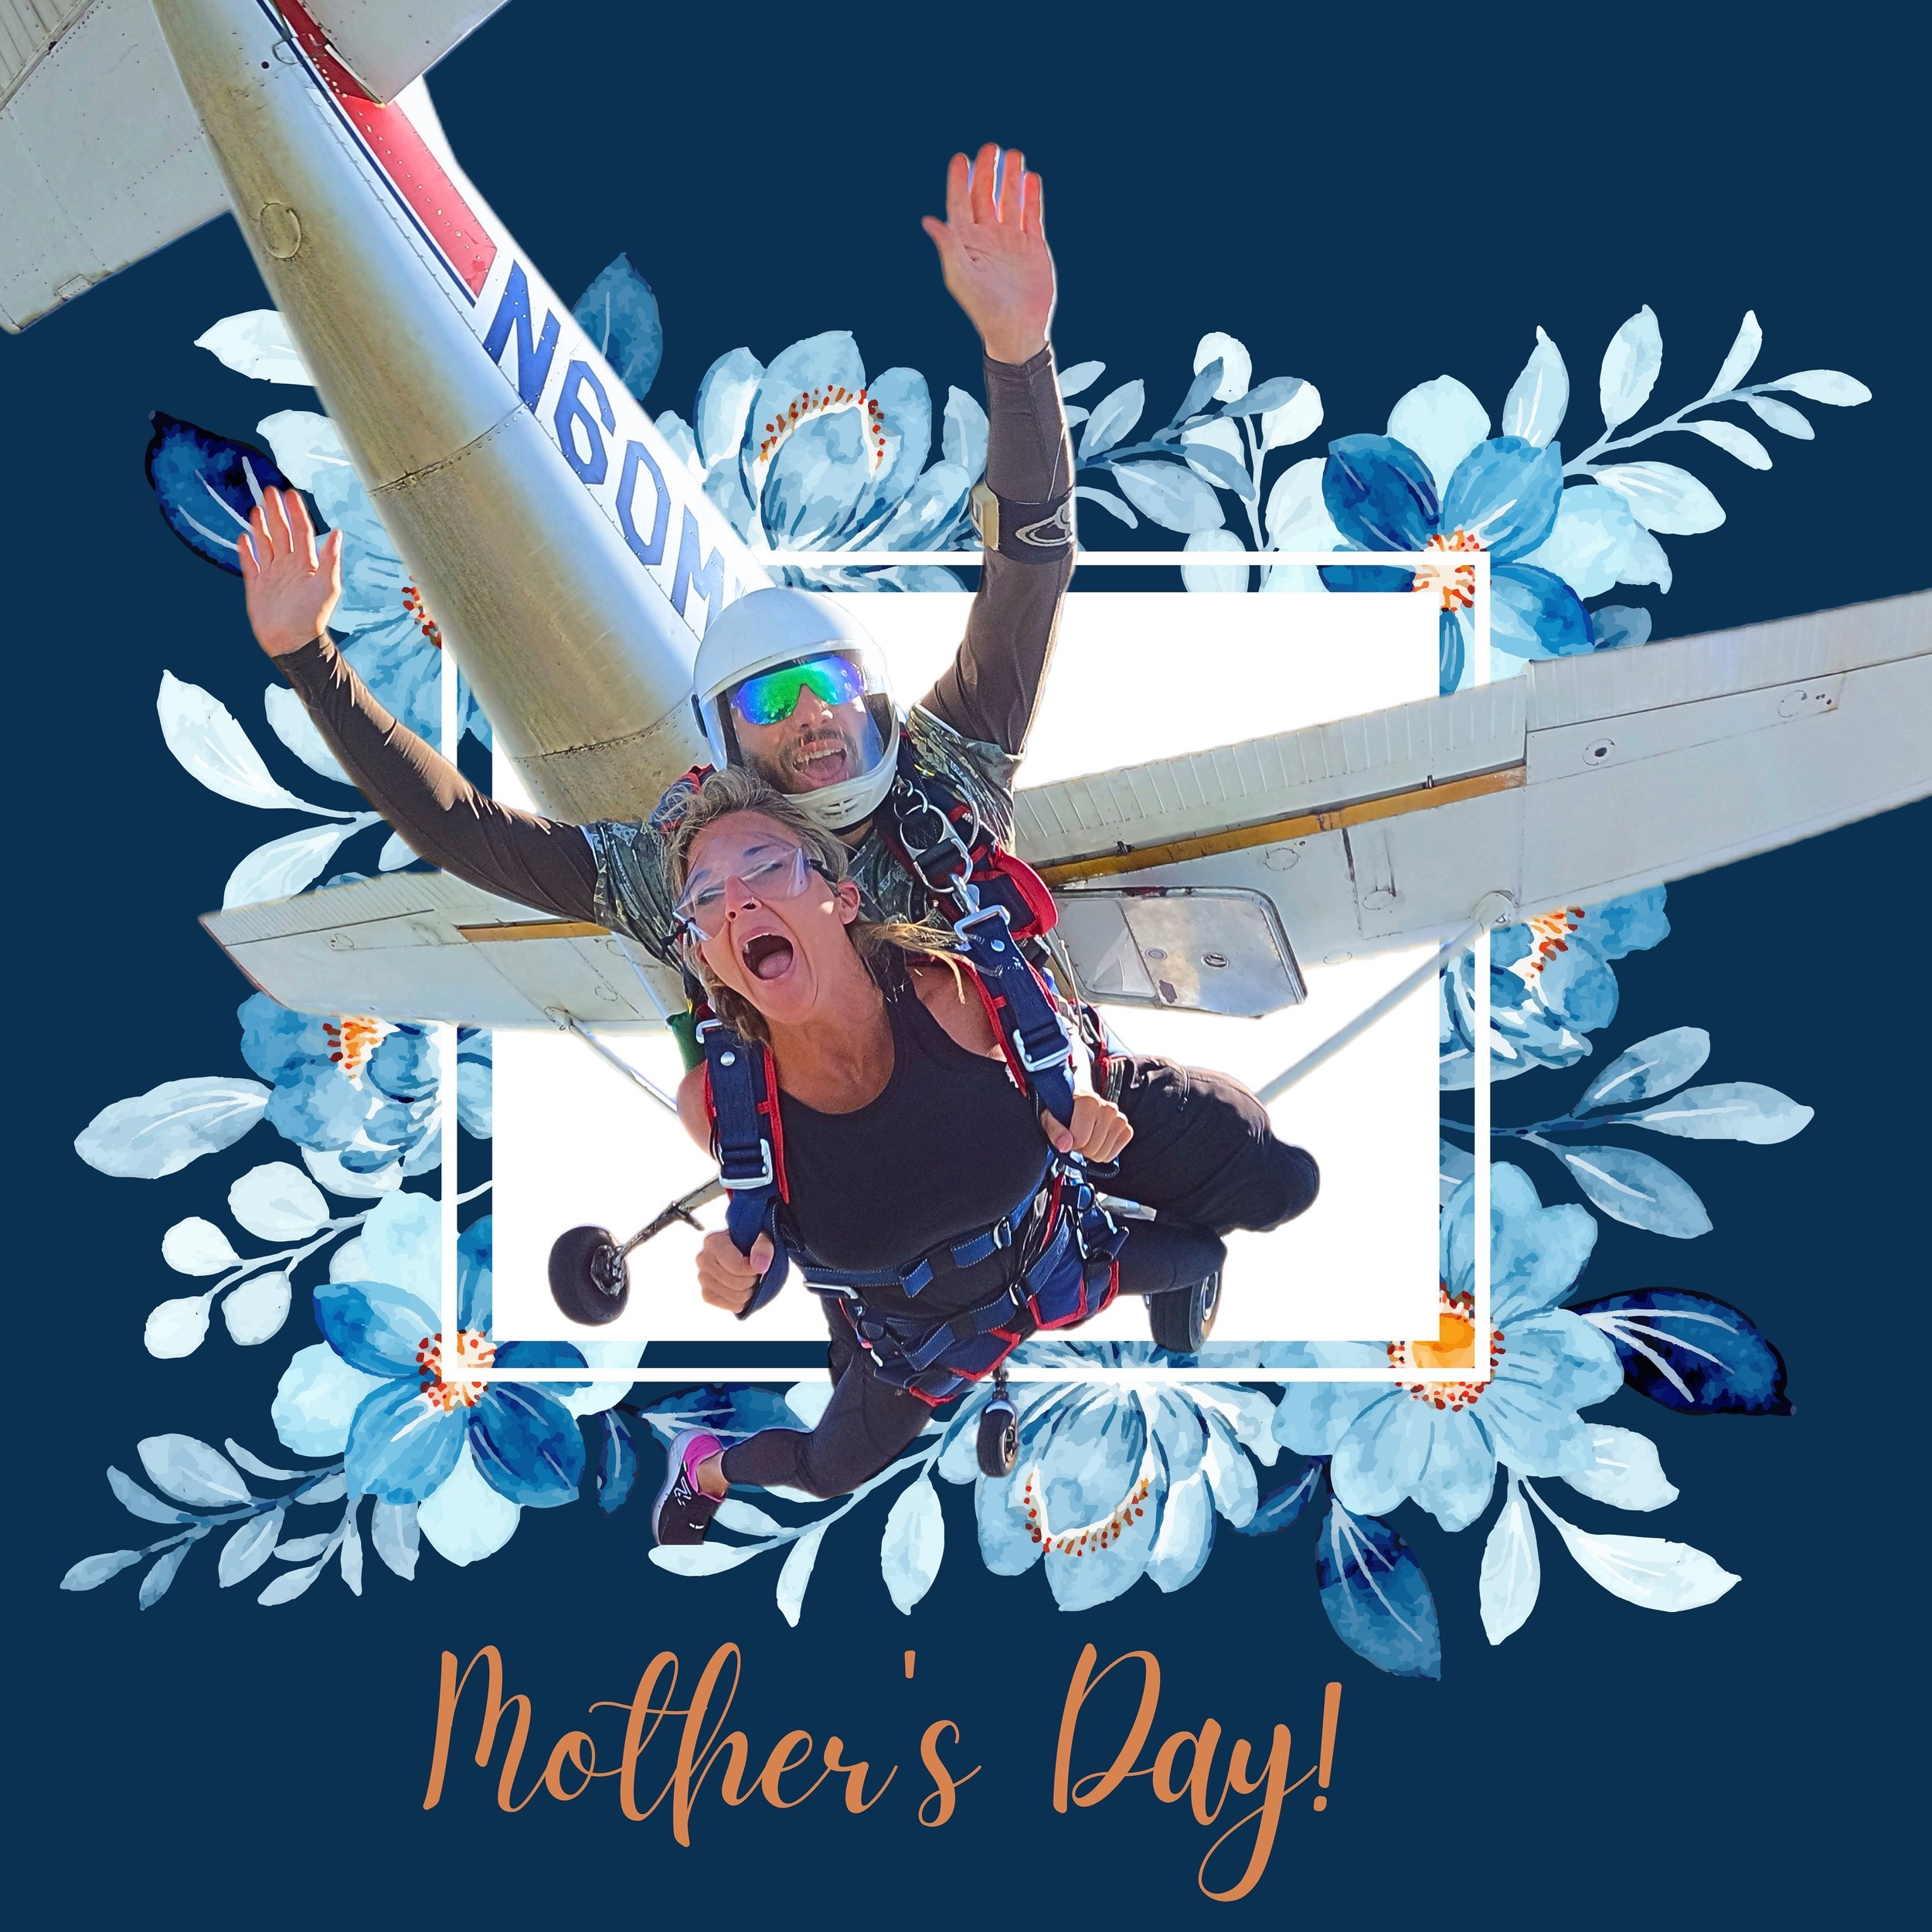 🪂💐Celebrate Mother&rsquo;s Day at Skydive Palatka with a tandem jump! Bring your mom for an unforgettable experience in the sky. Dog moms welcome too! Book now for a thrilling Mother&rsquo;s Day gift by clicking that link in the bio. #SkydivePalatk